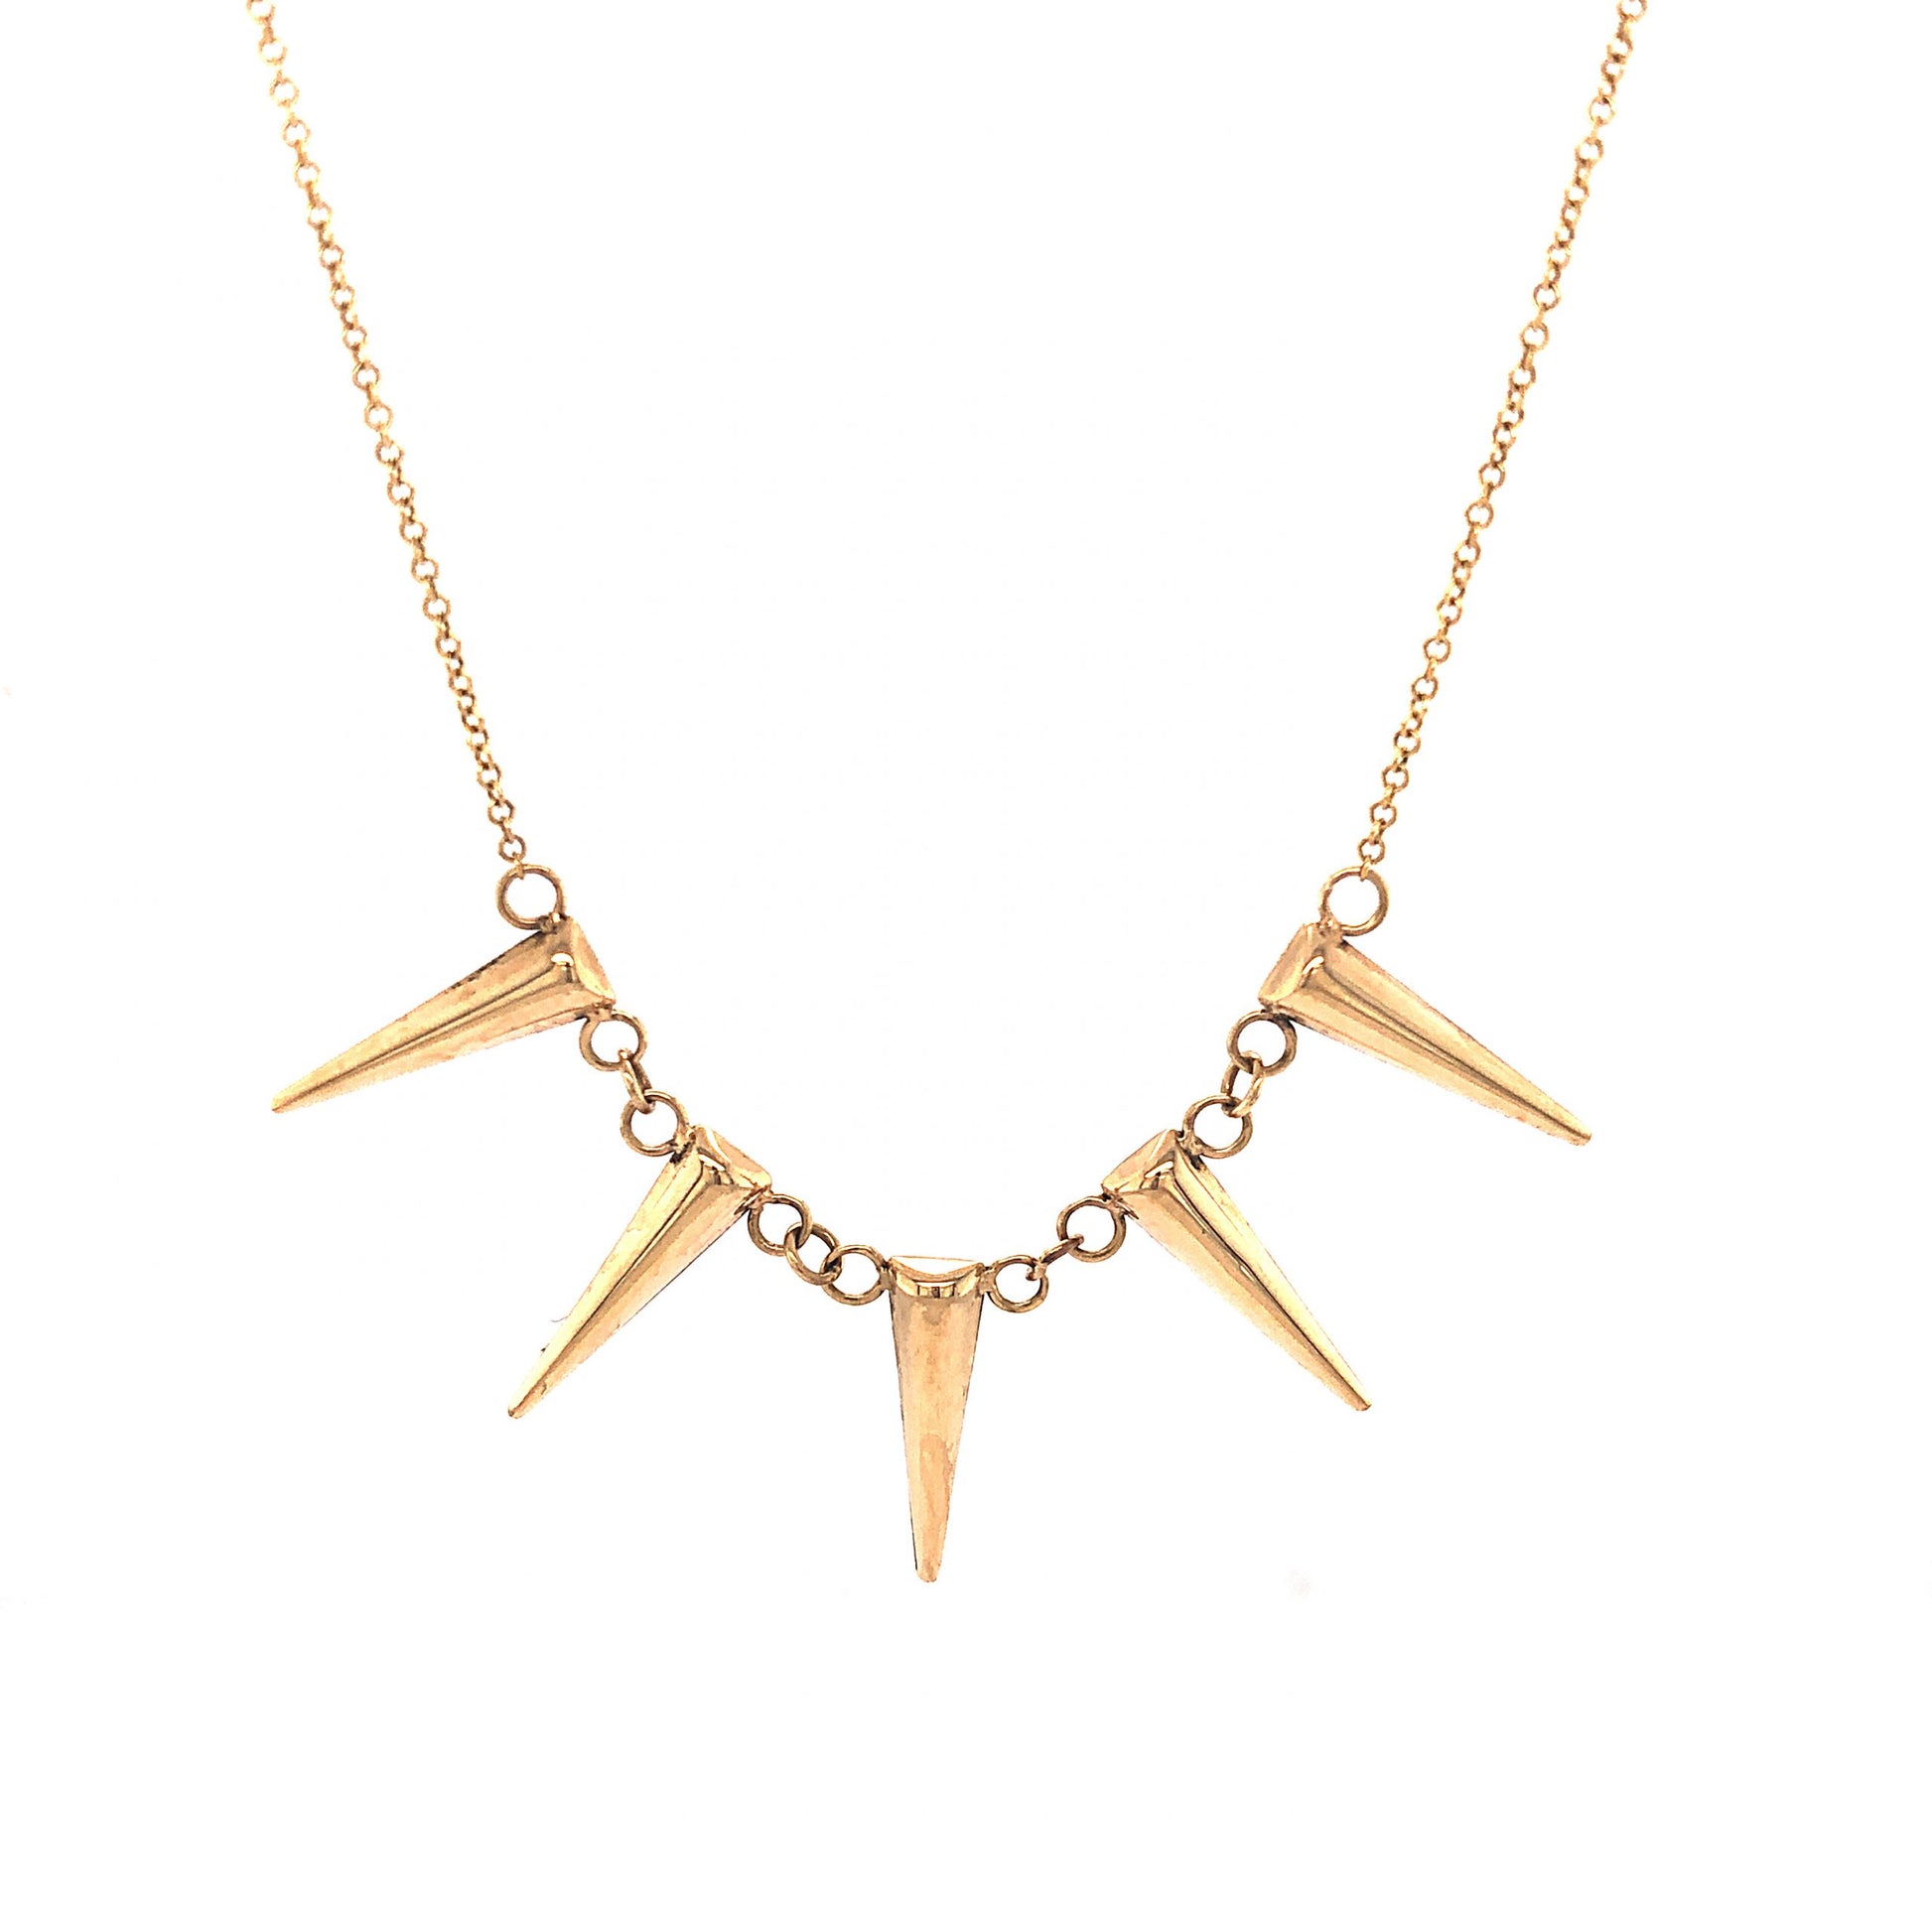 16 Inch Spike Necklace in 14k Yellow GoldComposition: 14 Karat Yellow GoldTotal Gram Weight: 2.7 gInscription: RL 585